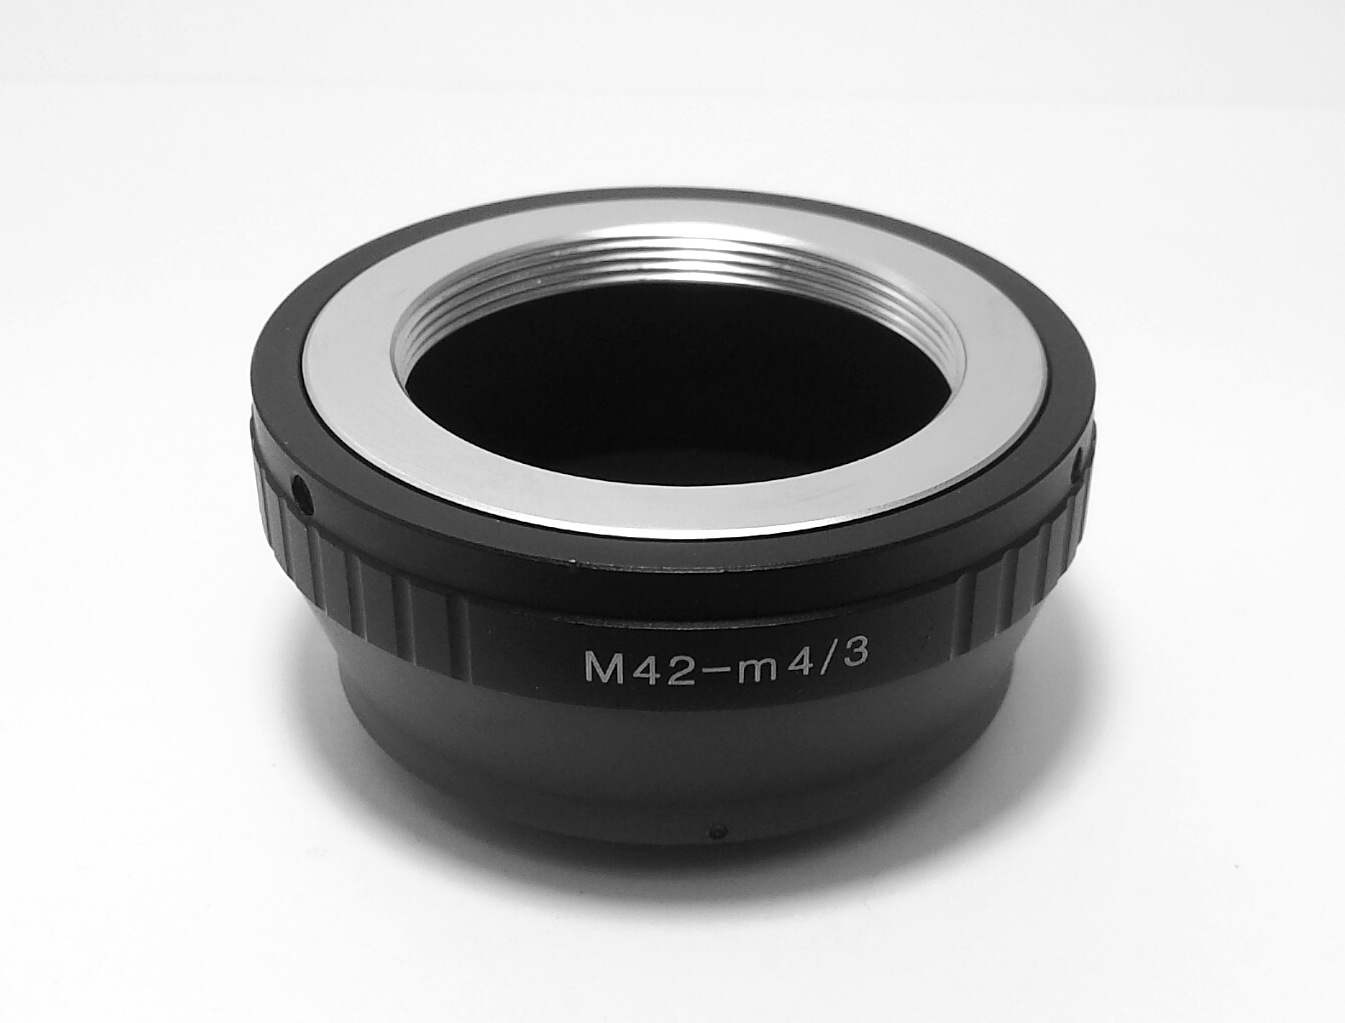 M42 Lens to Micro 4/3 Camera Body Adapter